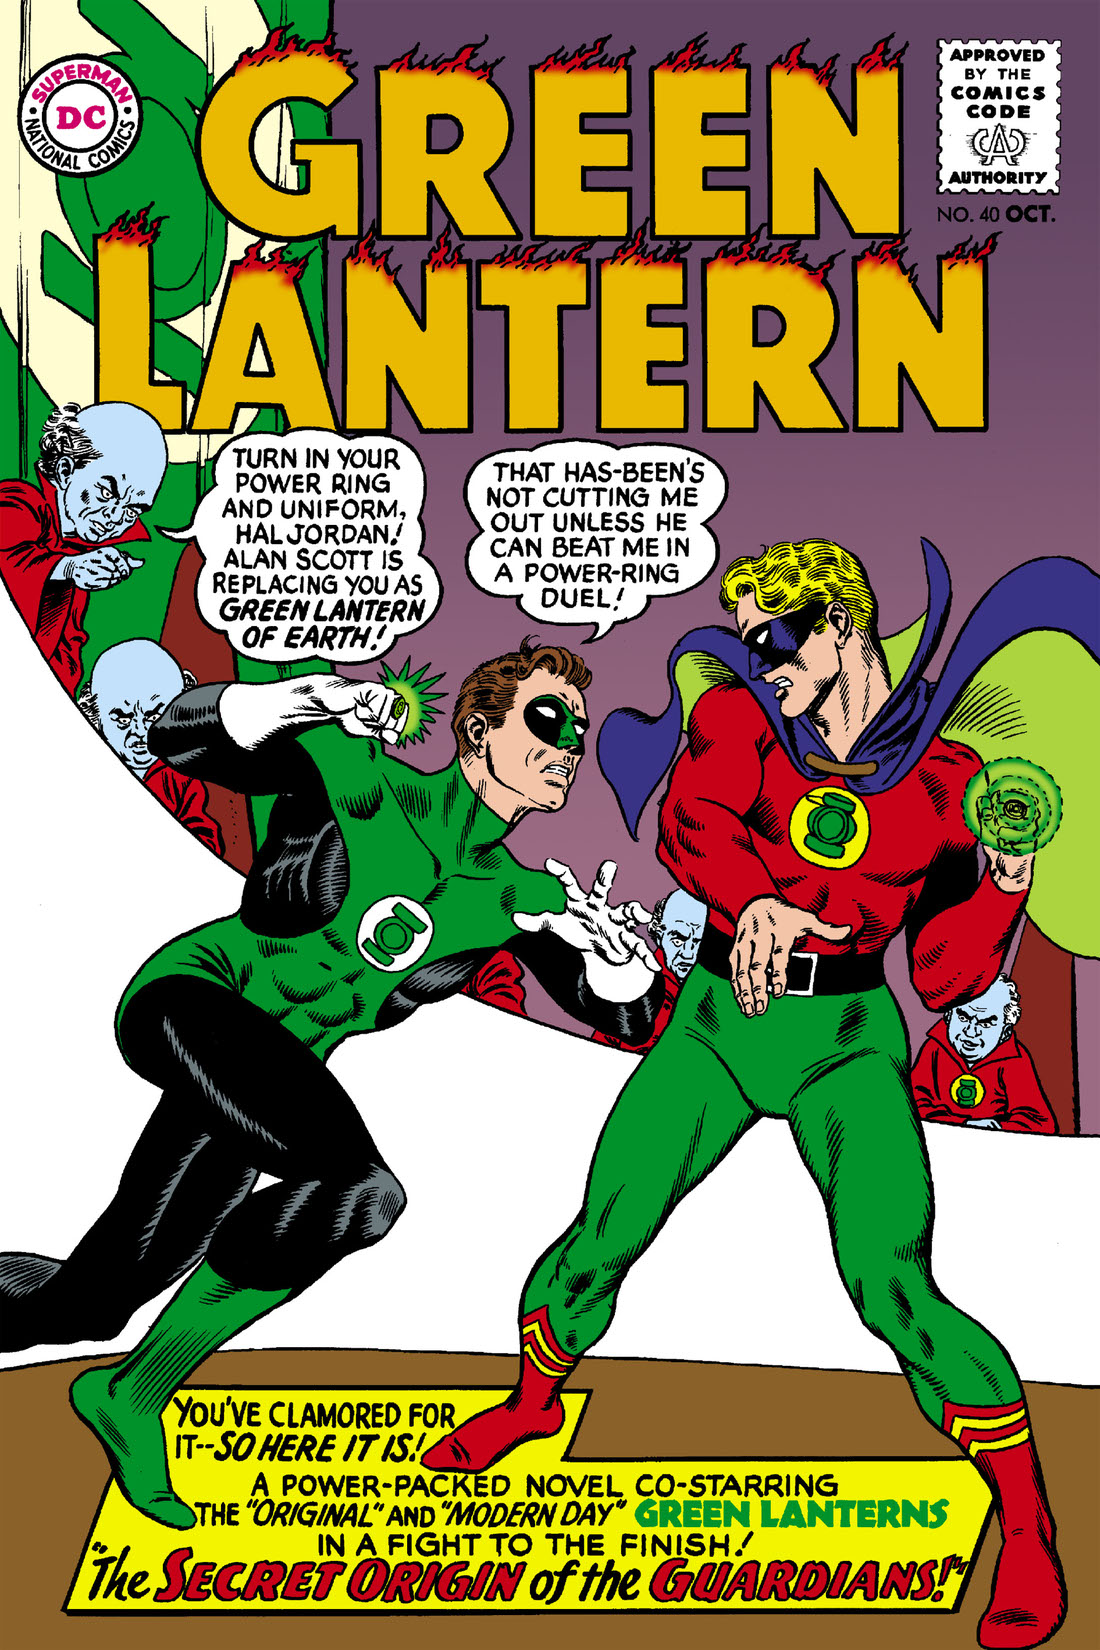 Green Lantern (1960-) #40 preview images